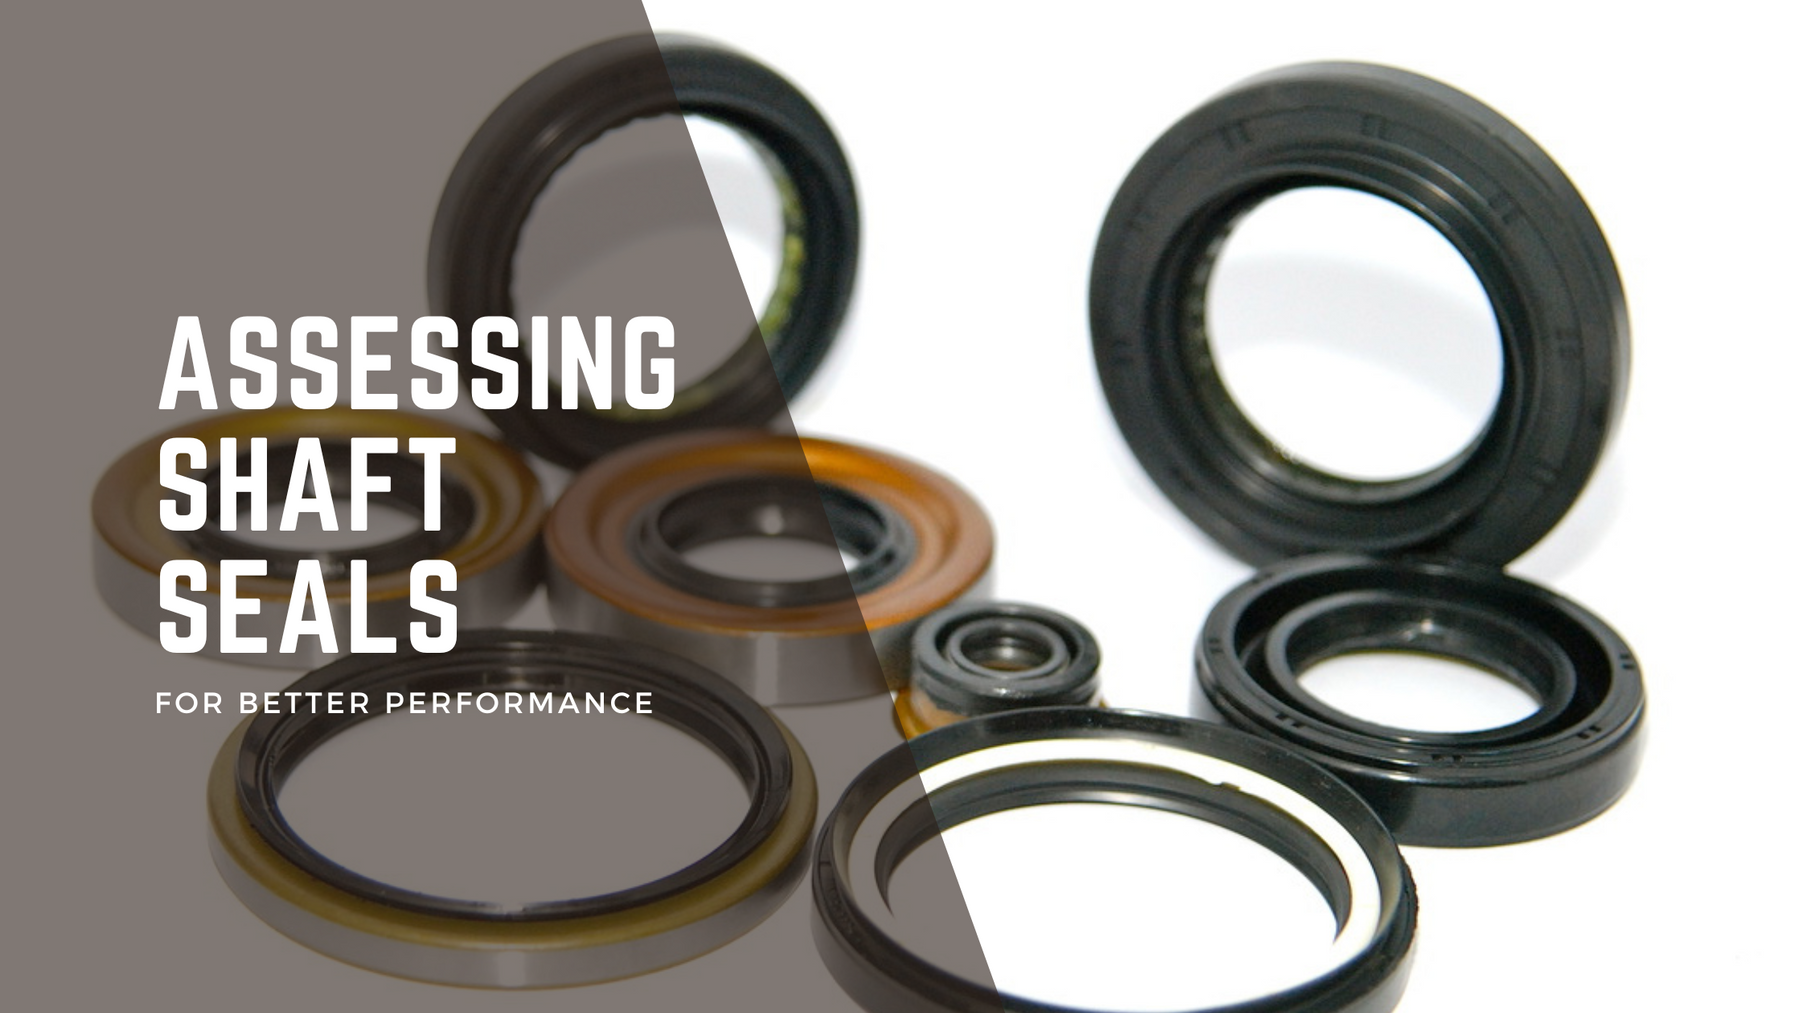 About Oil Seals: An Essential Guide for Hydraulic Pump and Motor Applications